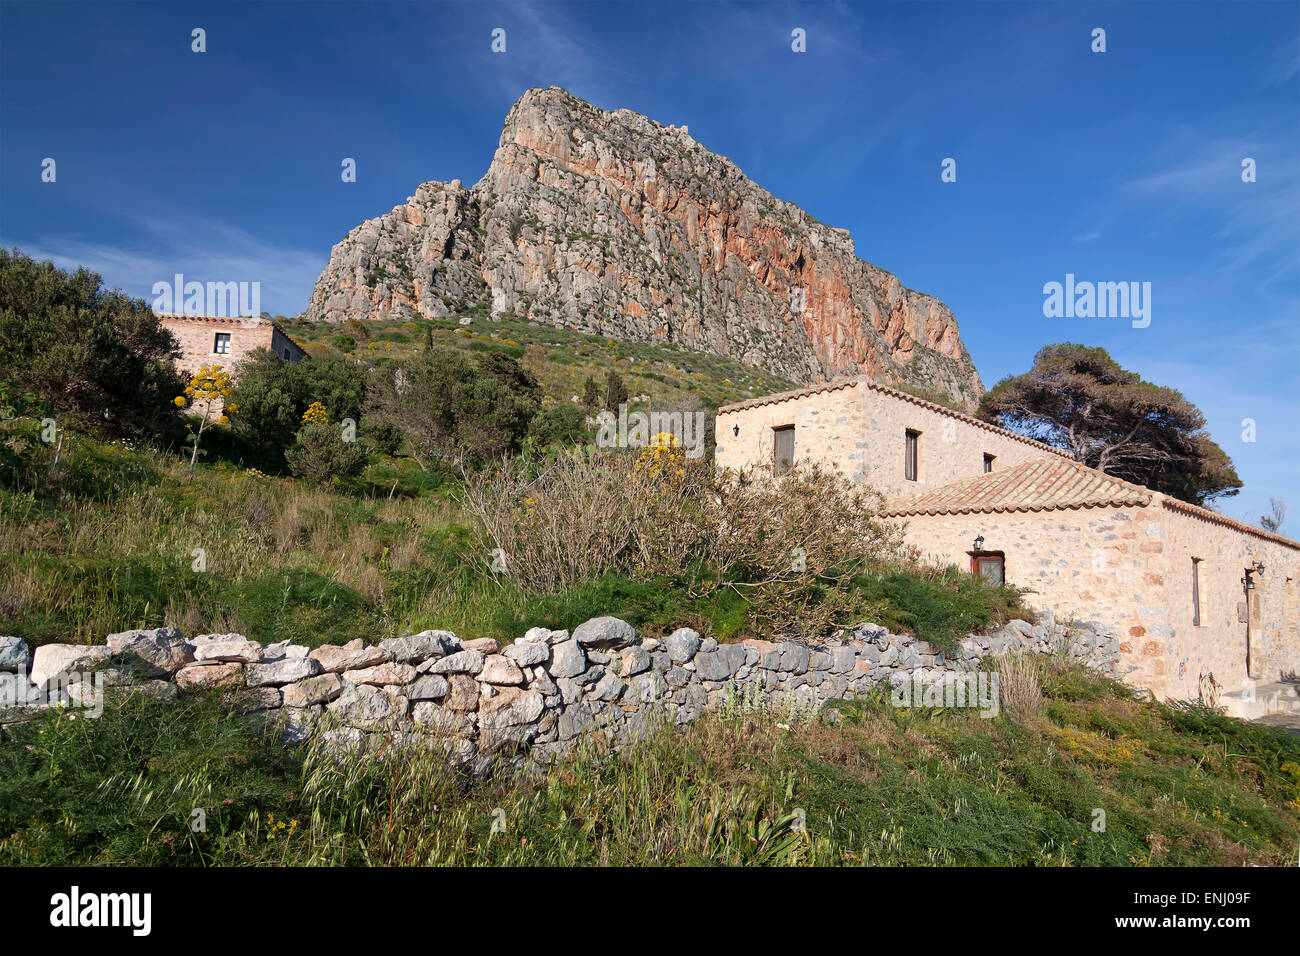 A view to the rock of Monemvasia and an old building, Greece Stock Photo